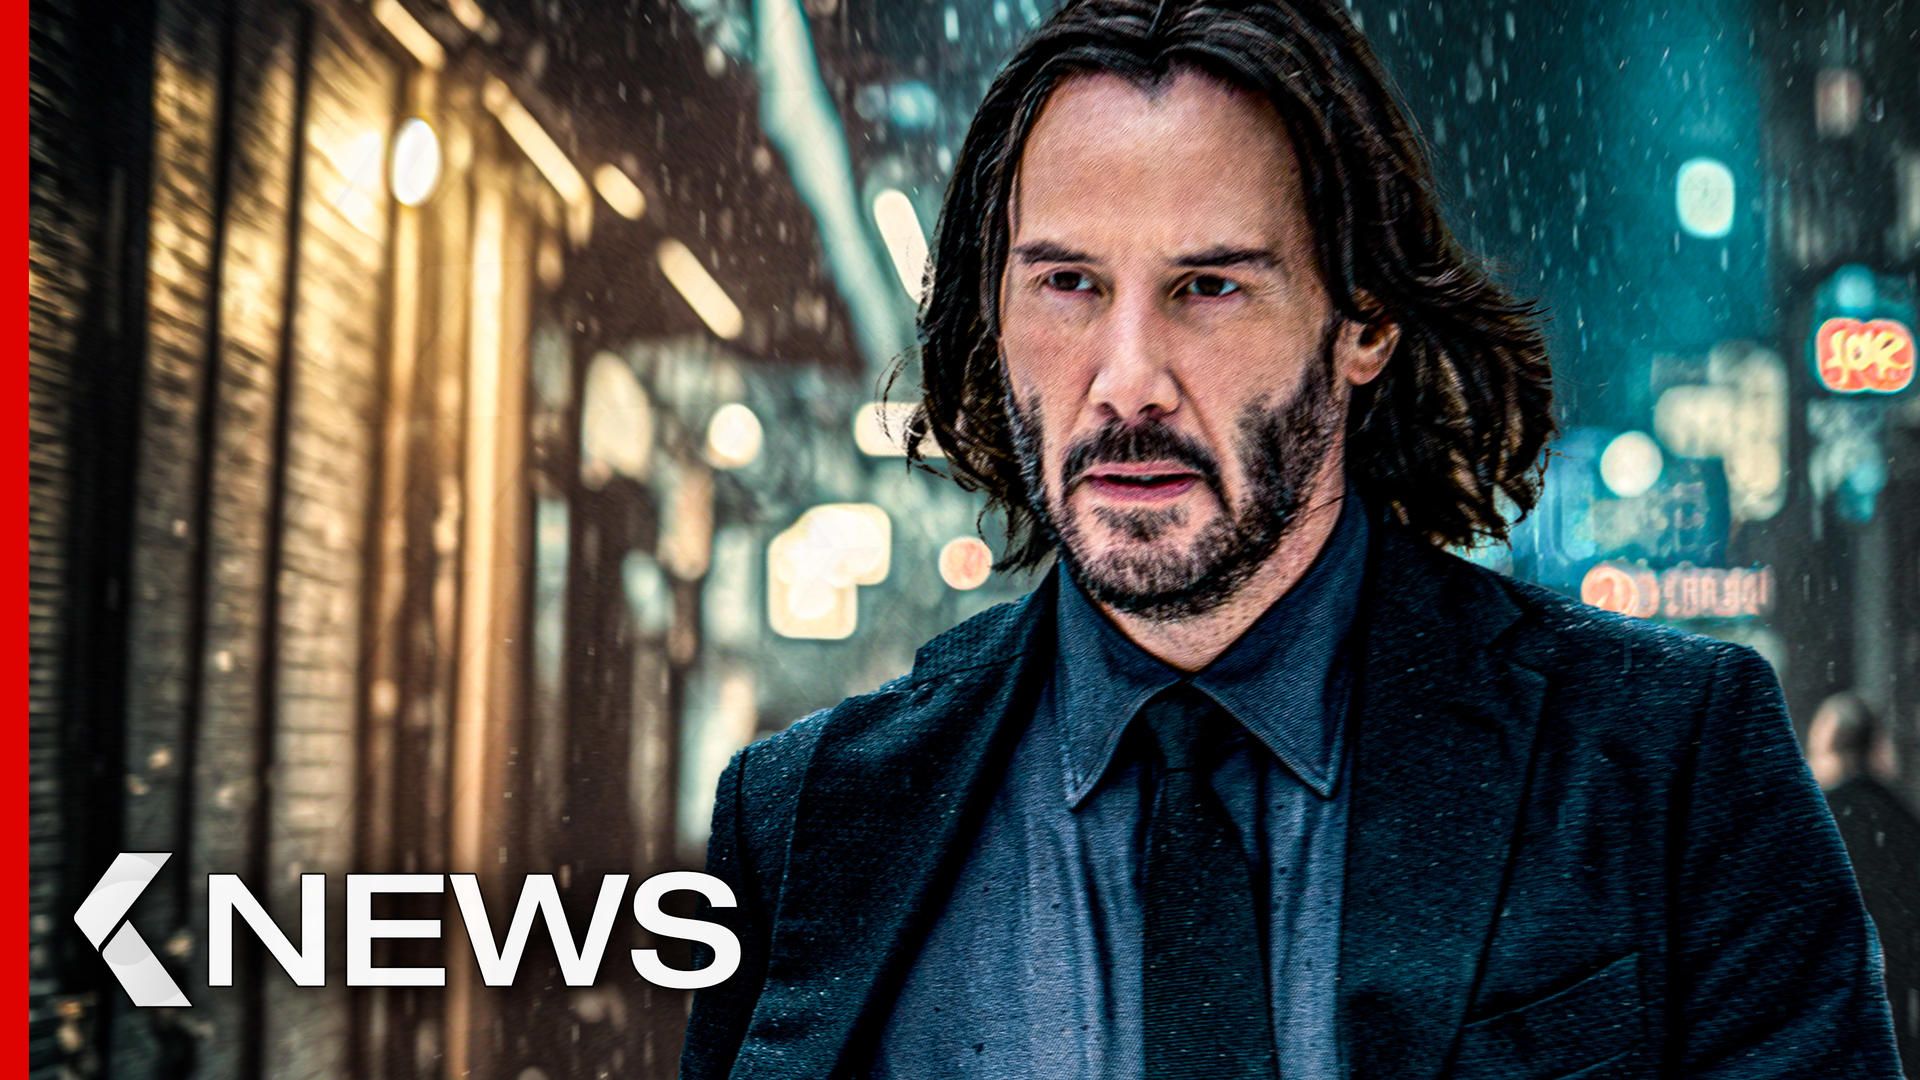 John Wick 4' and 'John Wick 5' Are Coming Soon and Filming Back-To